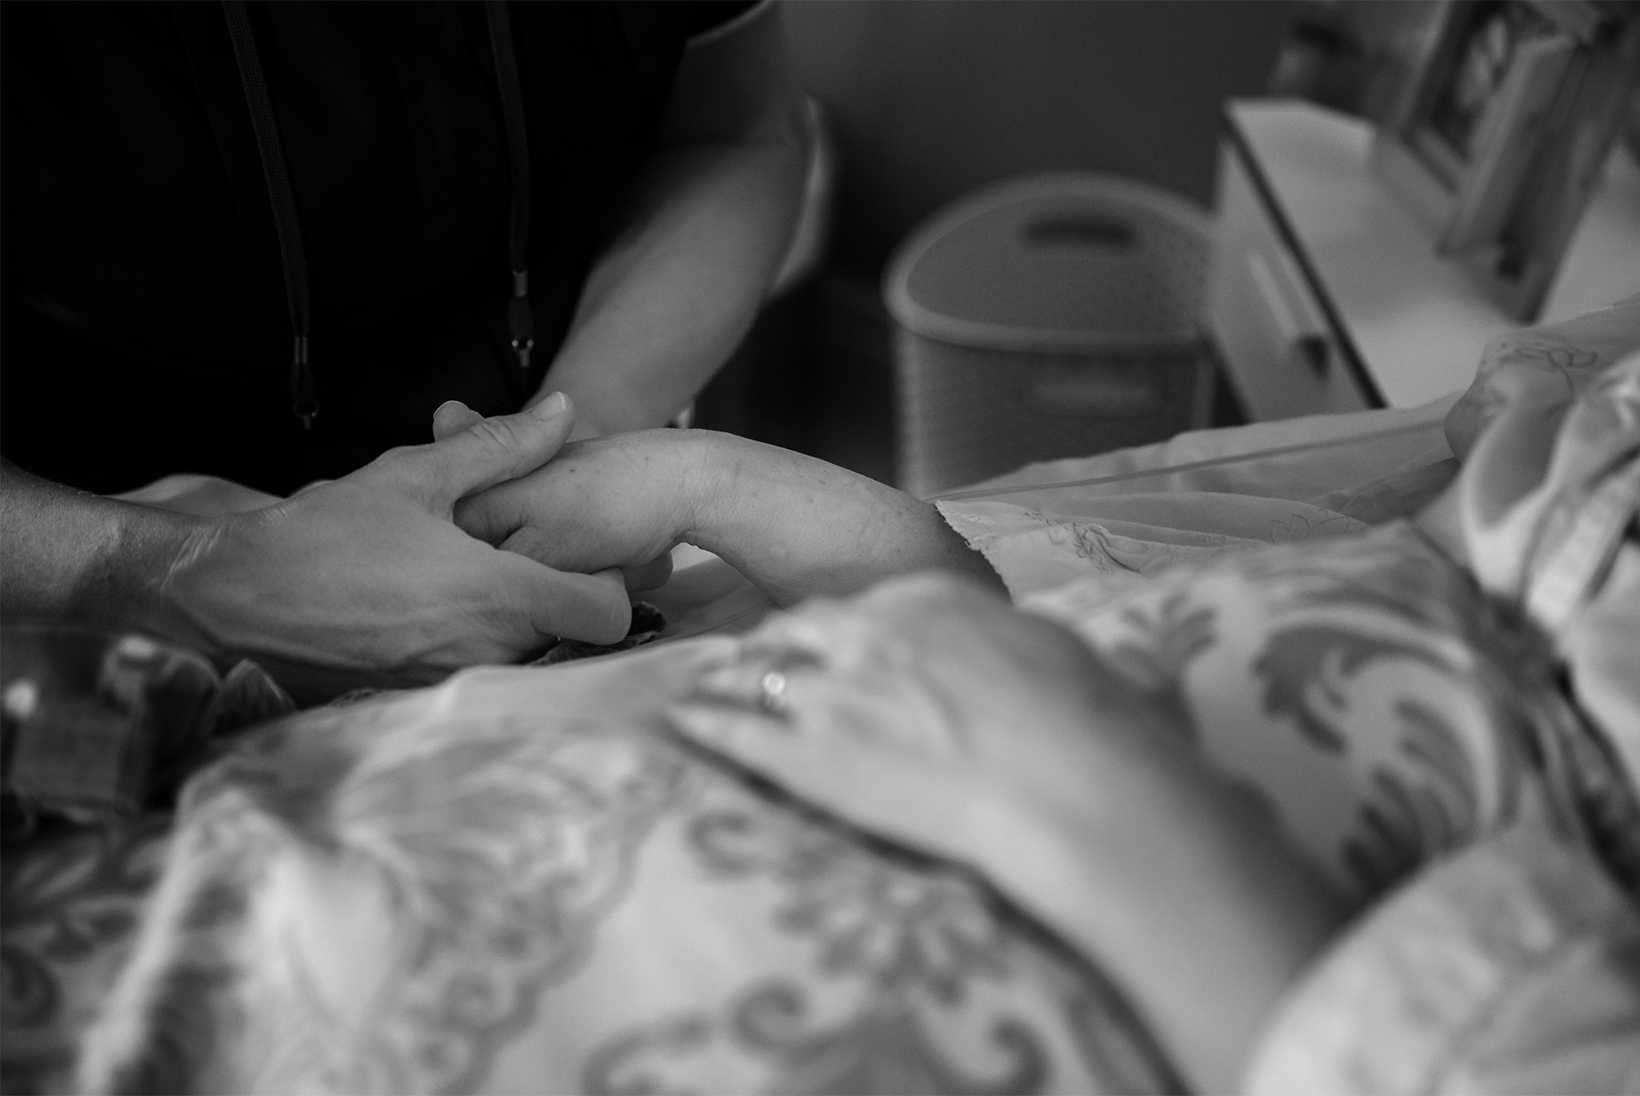 A person stands at a bedside and holds the right hand of the woman who is in bed. The focus of the image is on the hand-holding: the faces of the people are not visible.